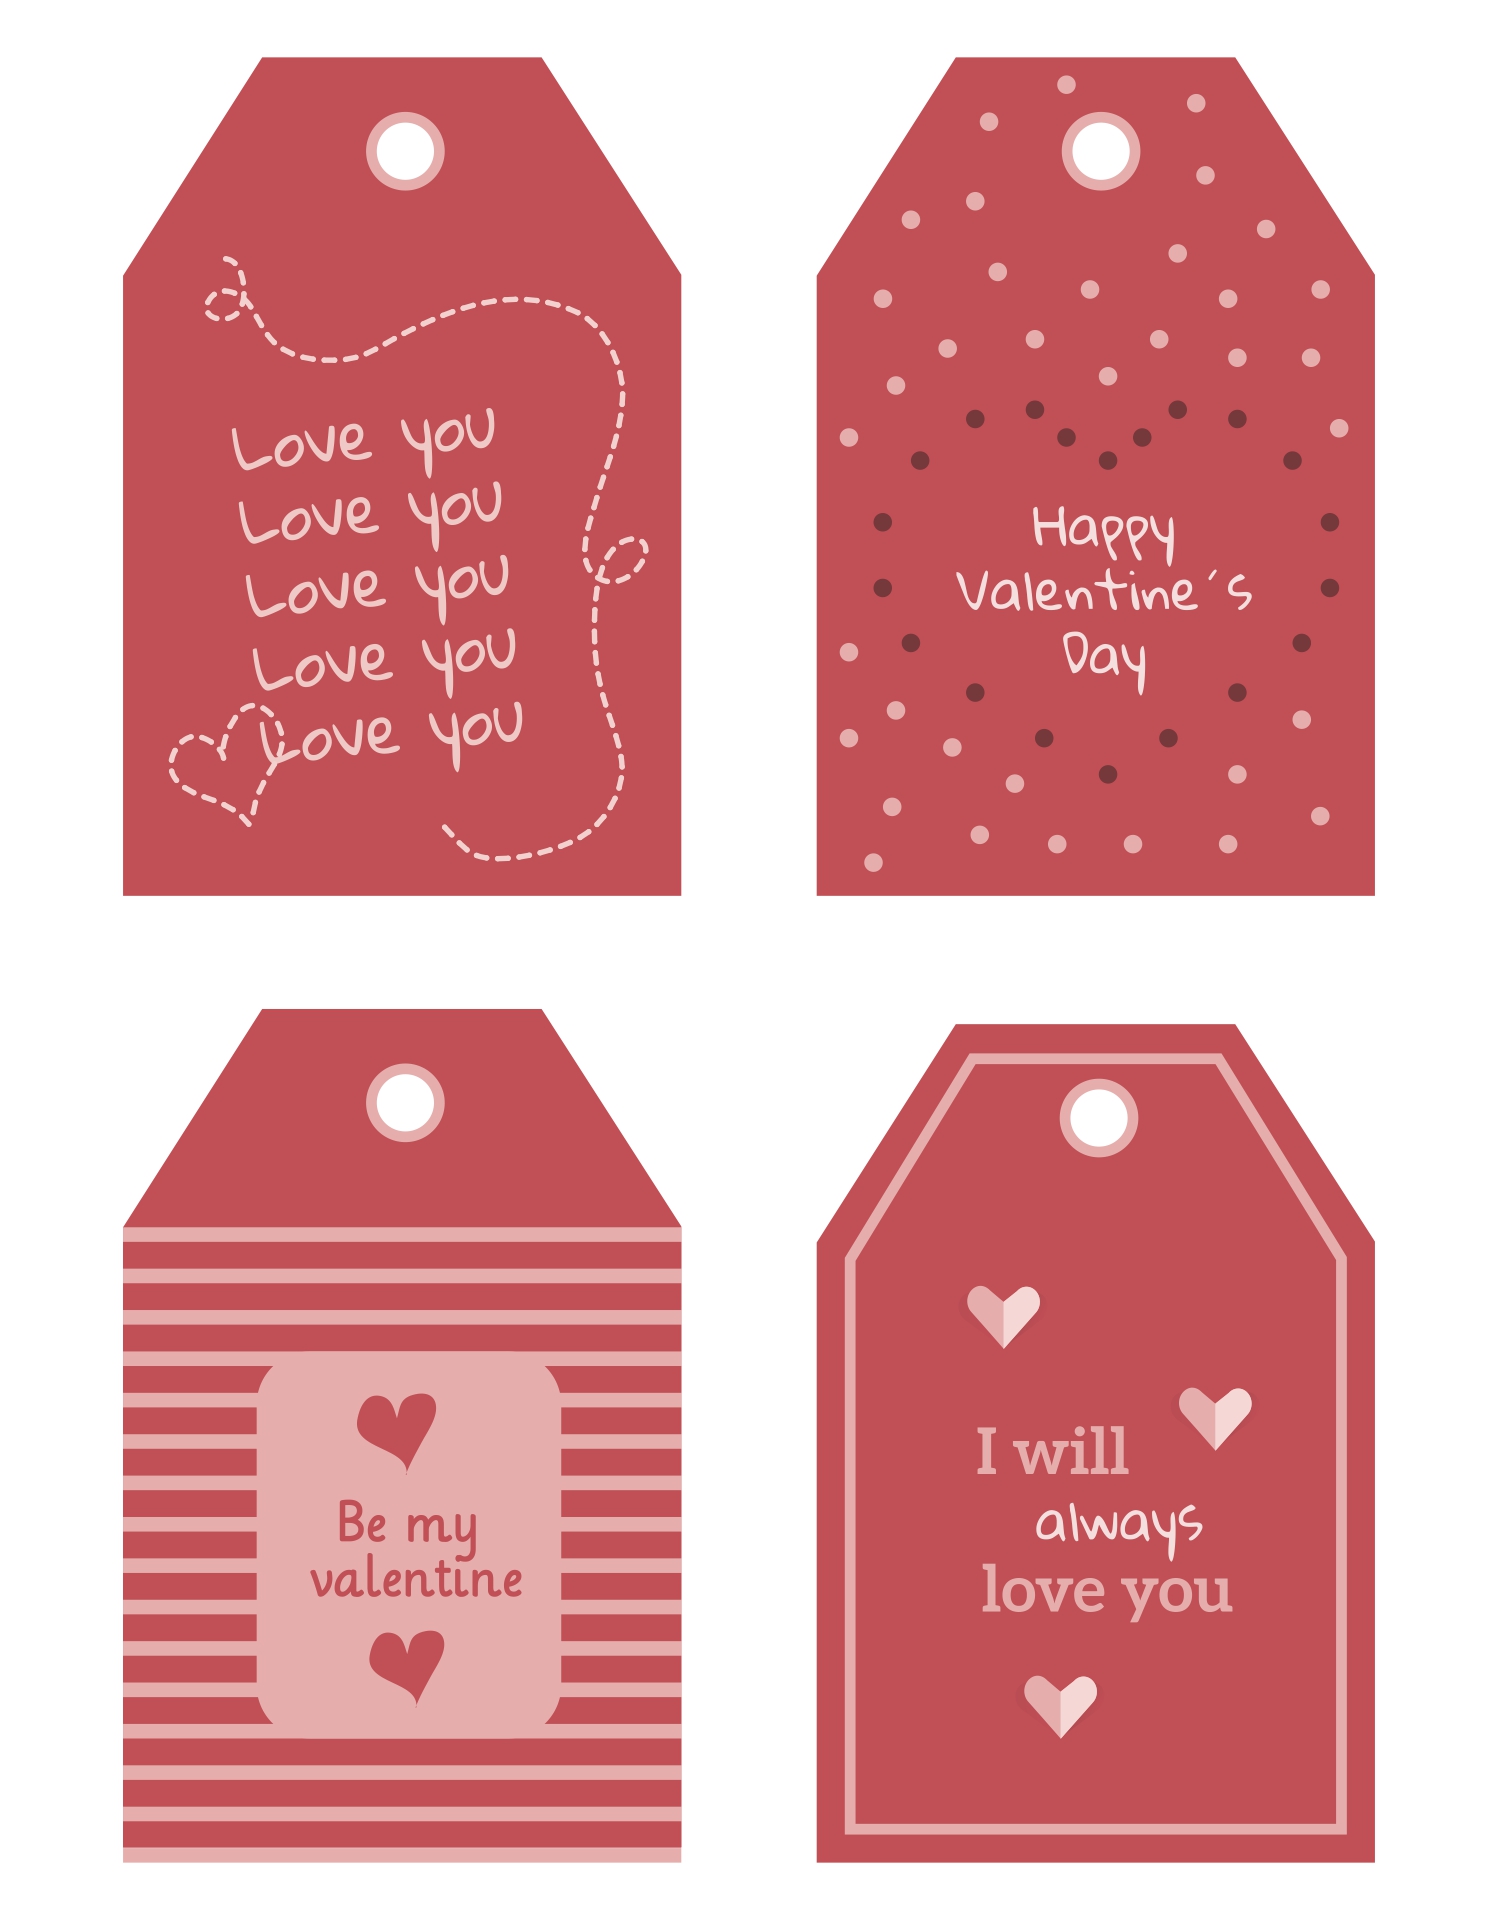 6-best-images-of-happy-valentine-printable-gift-tags-valentine-s-day